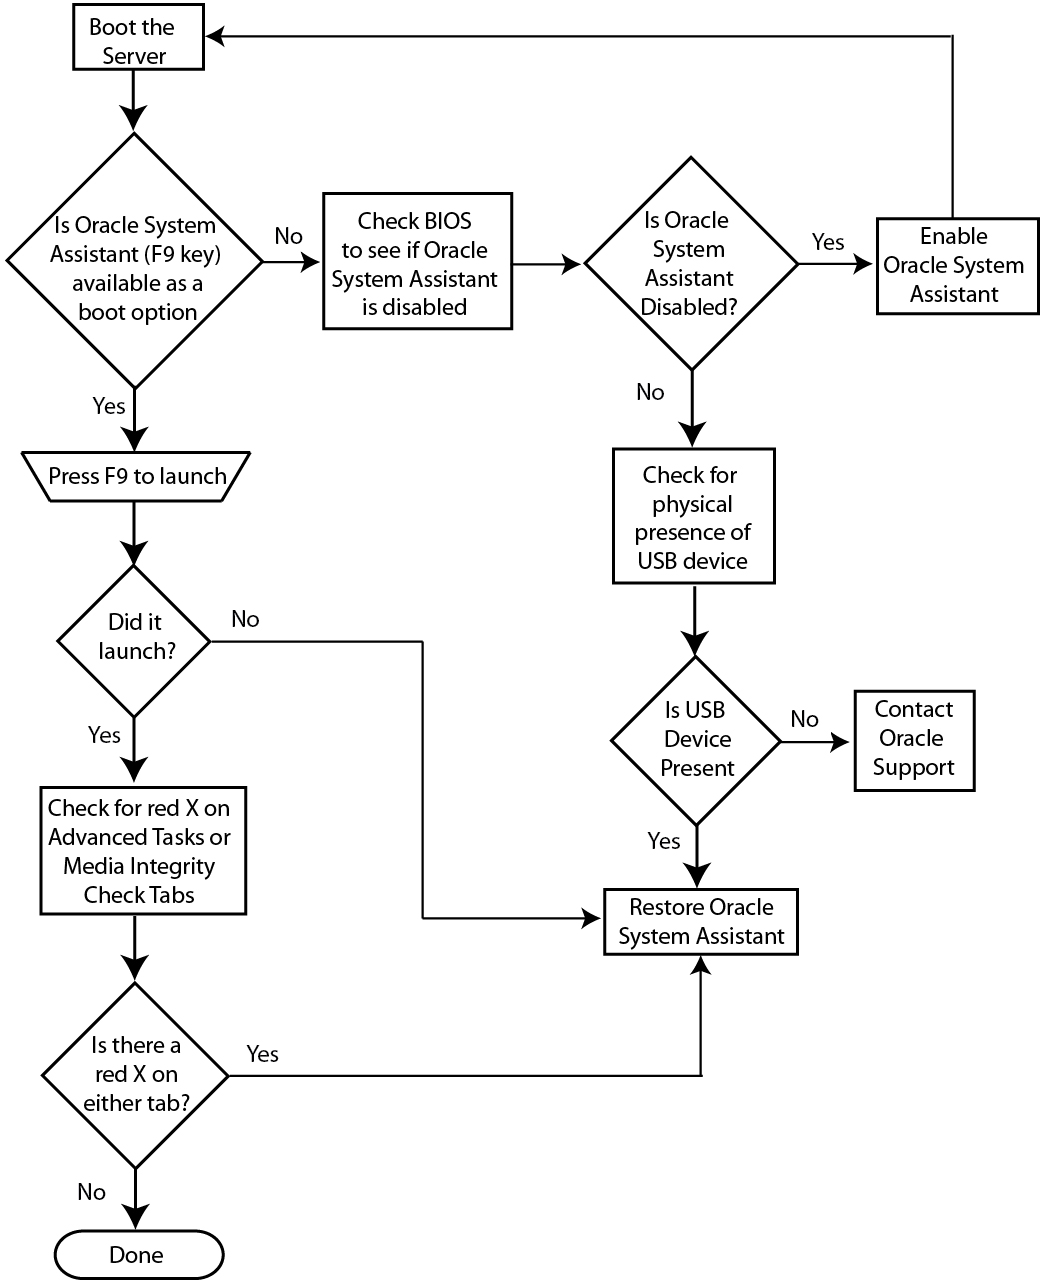 image:Troubleshooting flowchart for Oracle System Assistant